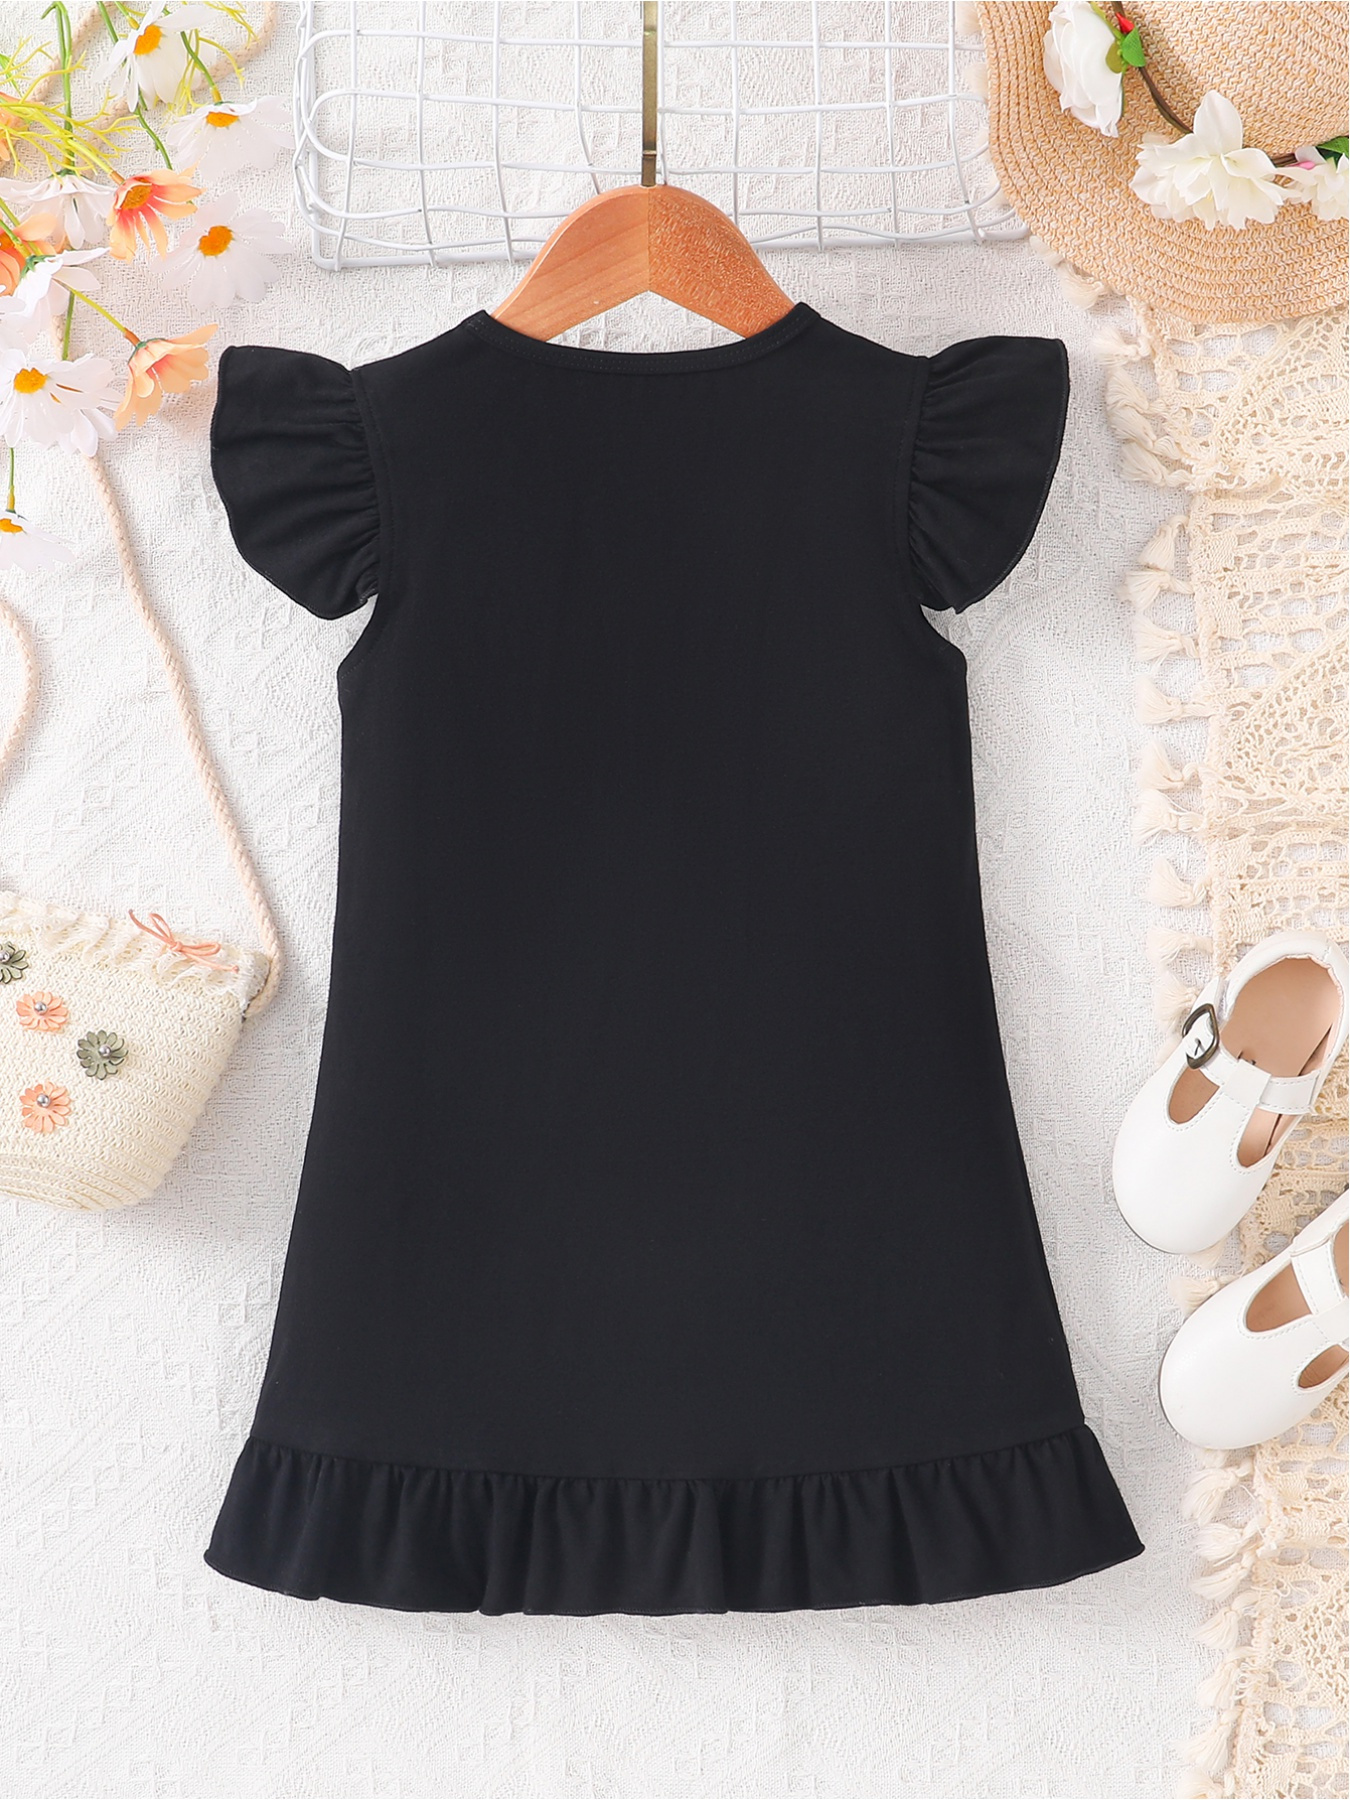 Best Brands for Girls Clothes - Baby Chick